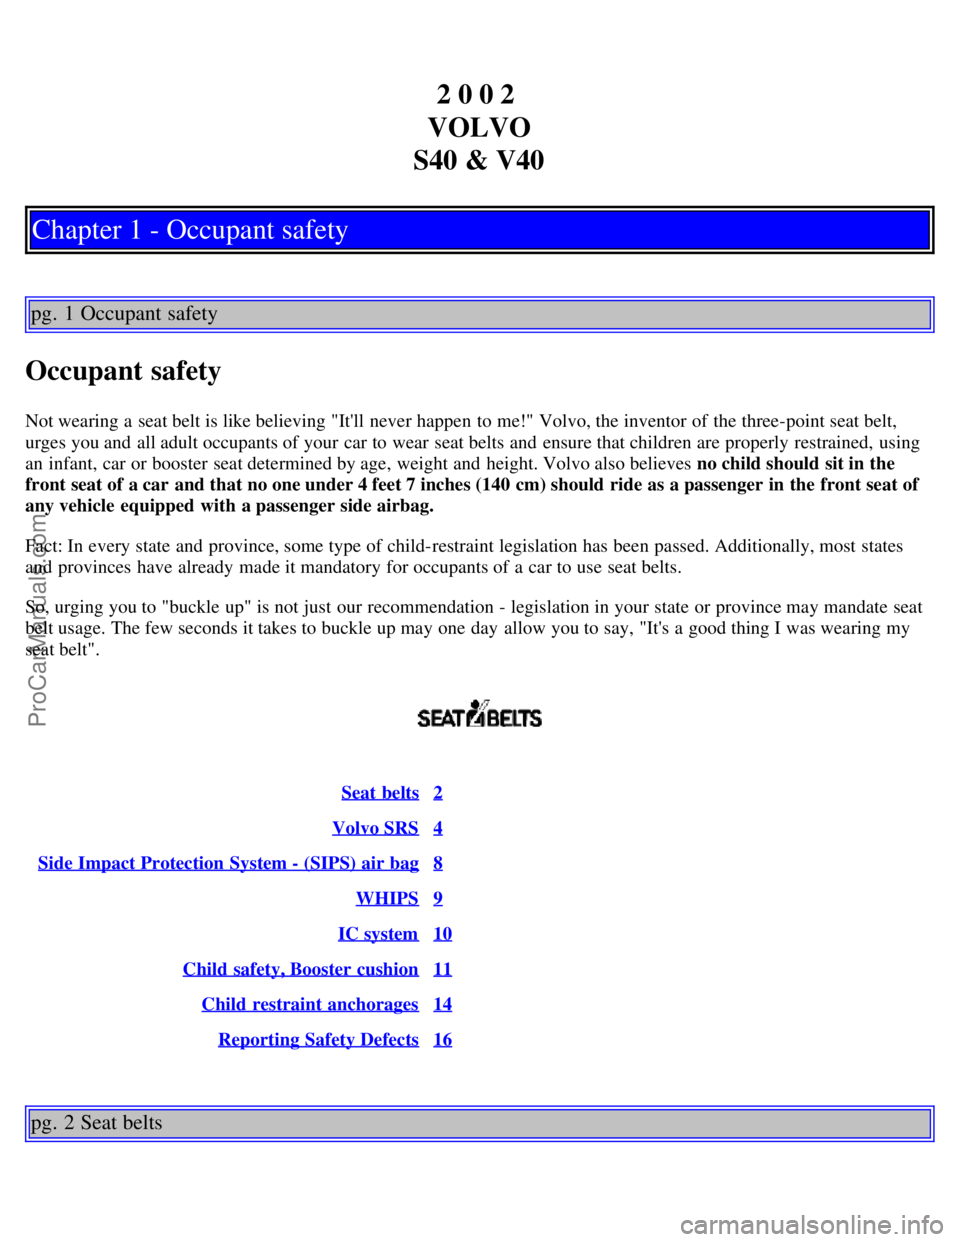 VOLVO S40 2002  Owners Manual 2 0 0 2 
VOLVO
S40 & V40
Chapter 1 - Occupant safety
pg. 1 Occupant safety
Occupant safety
Not wearing a  seat belt is like believing "Itll  never happen to me!" Volvo, the inventor of the three-poin